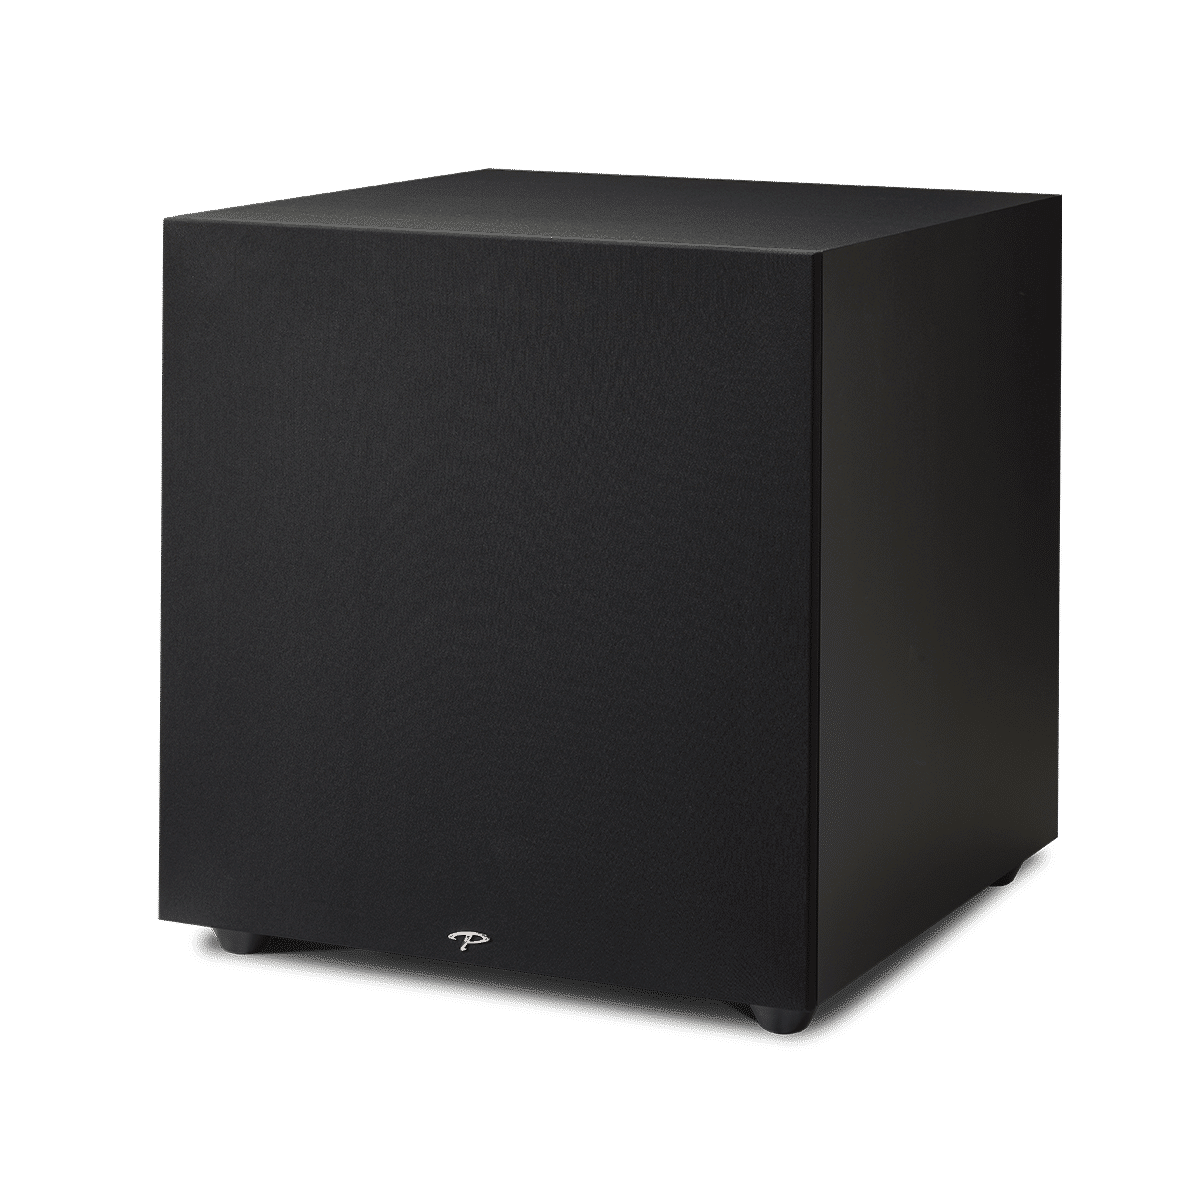 Paradigm Defiance X15 Subwoofer front angled view2